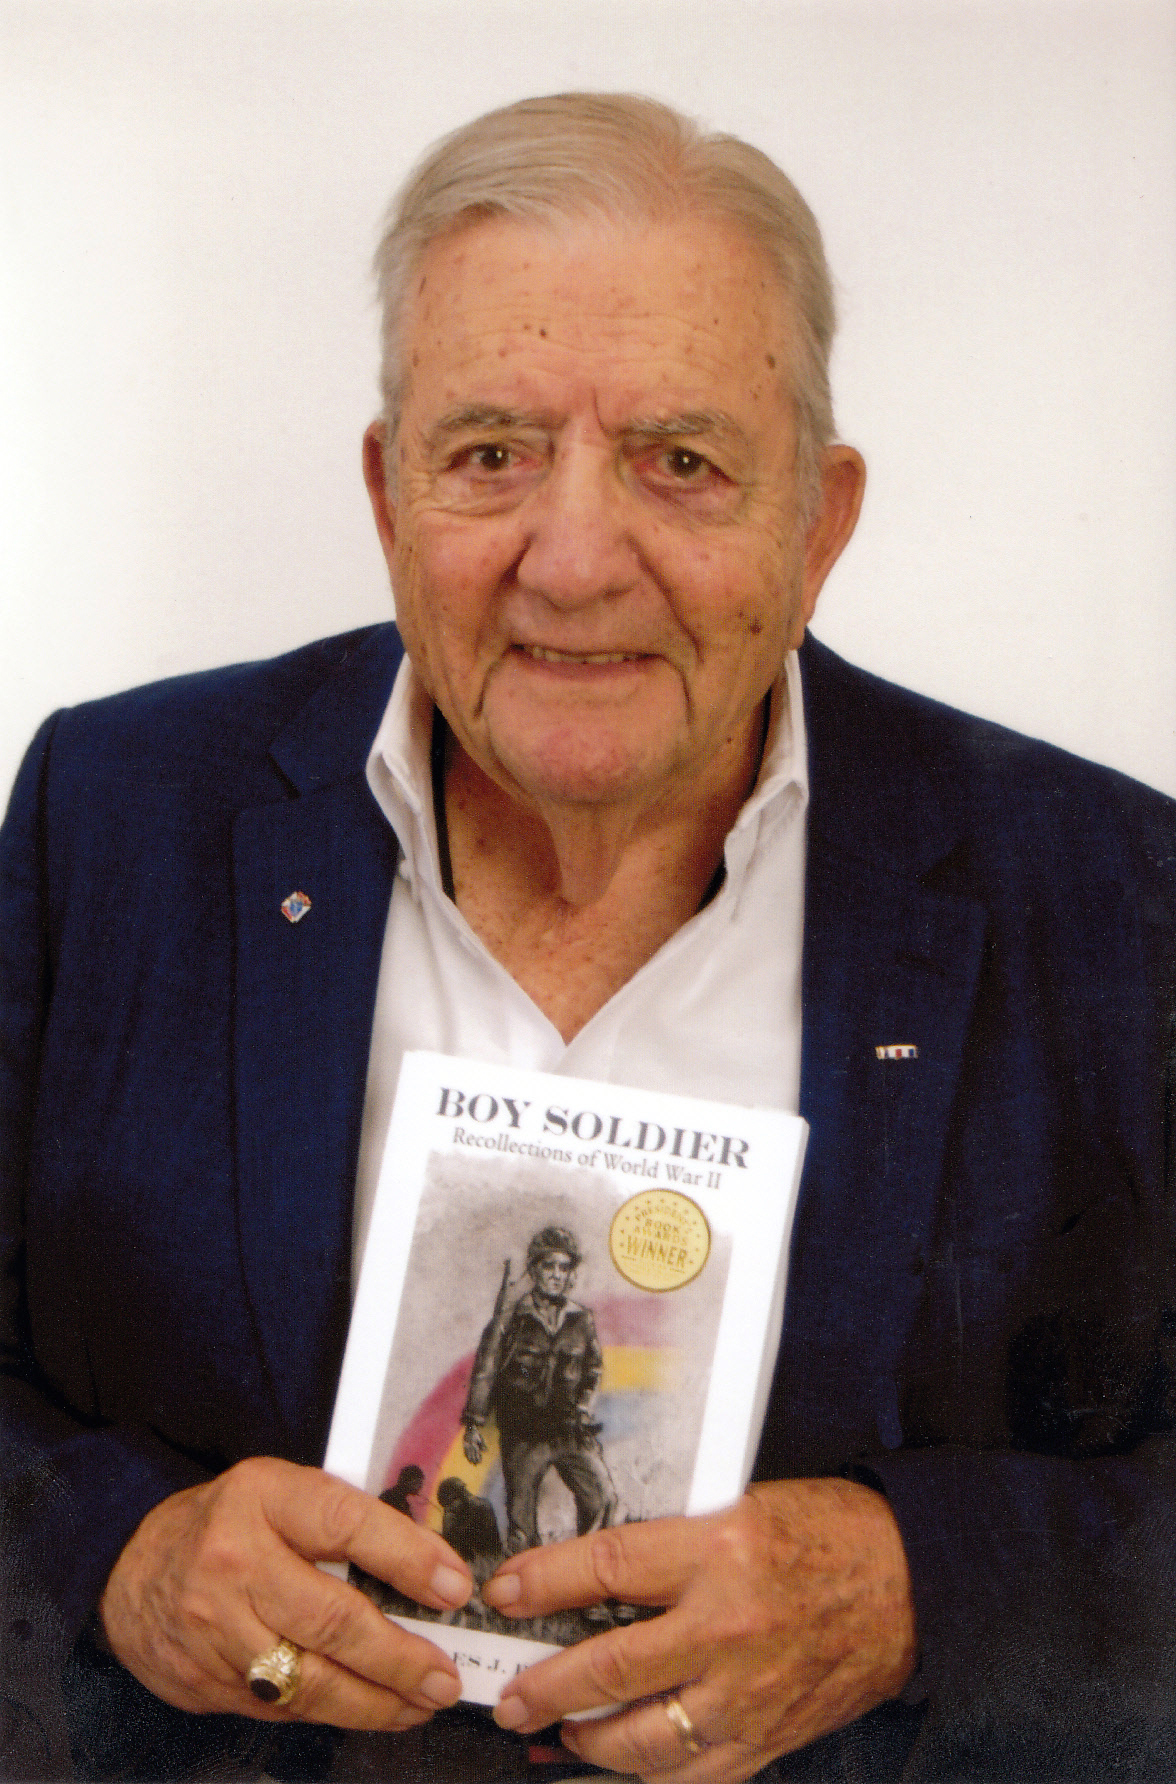 Charles Palmeri with his book Boy Soldier